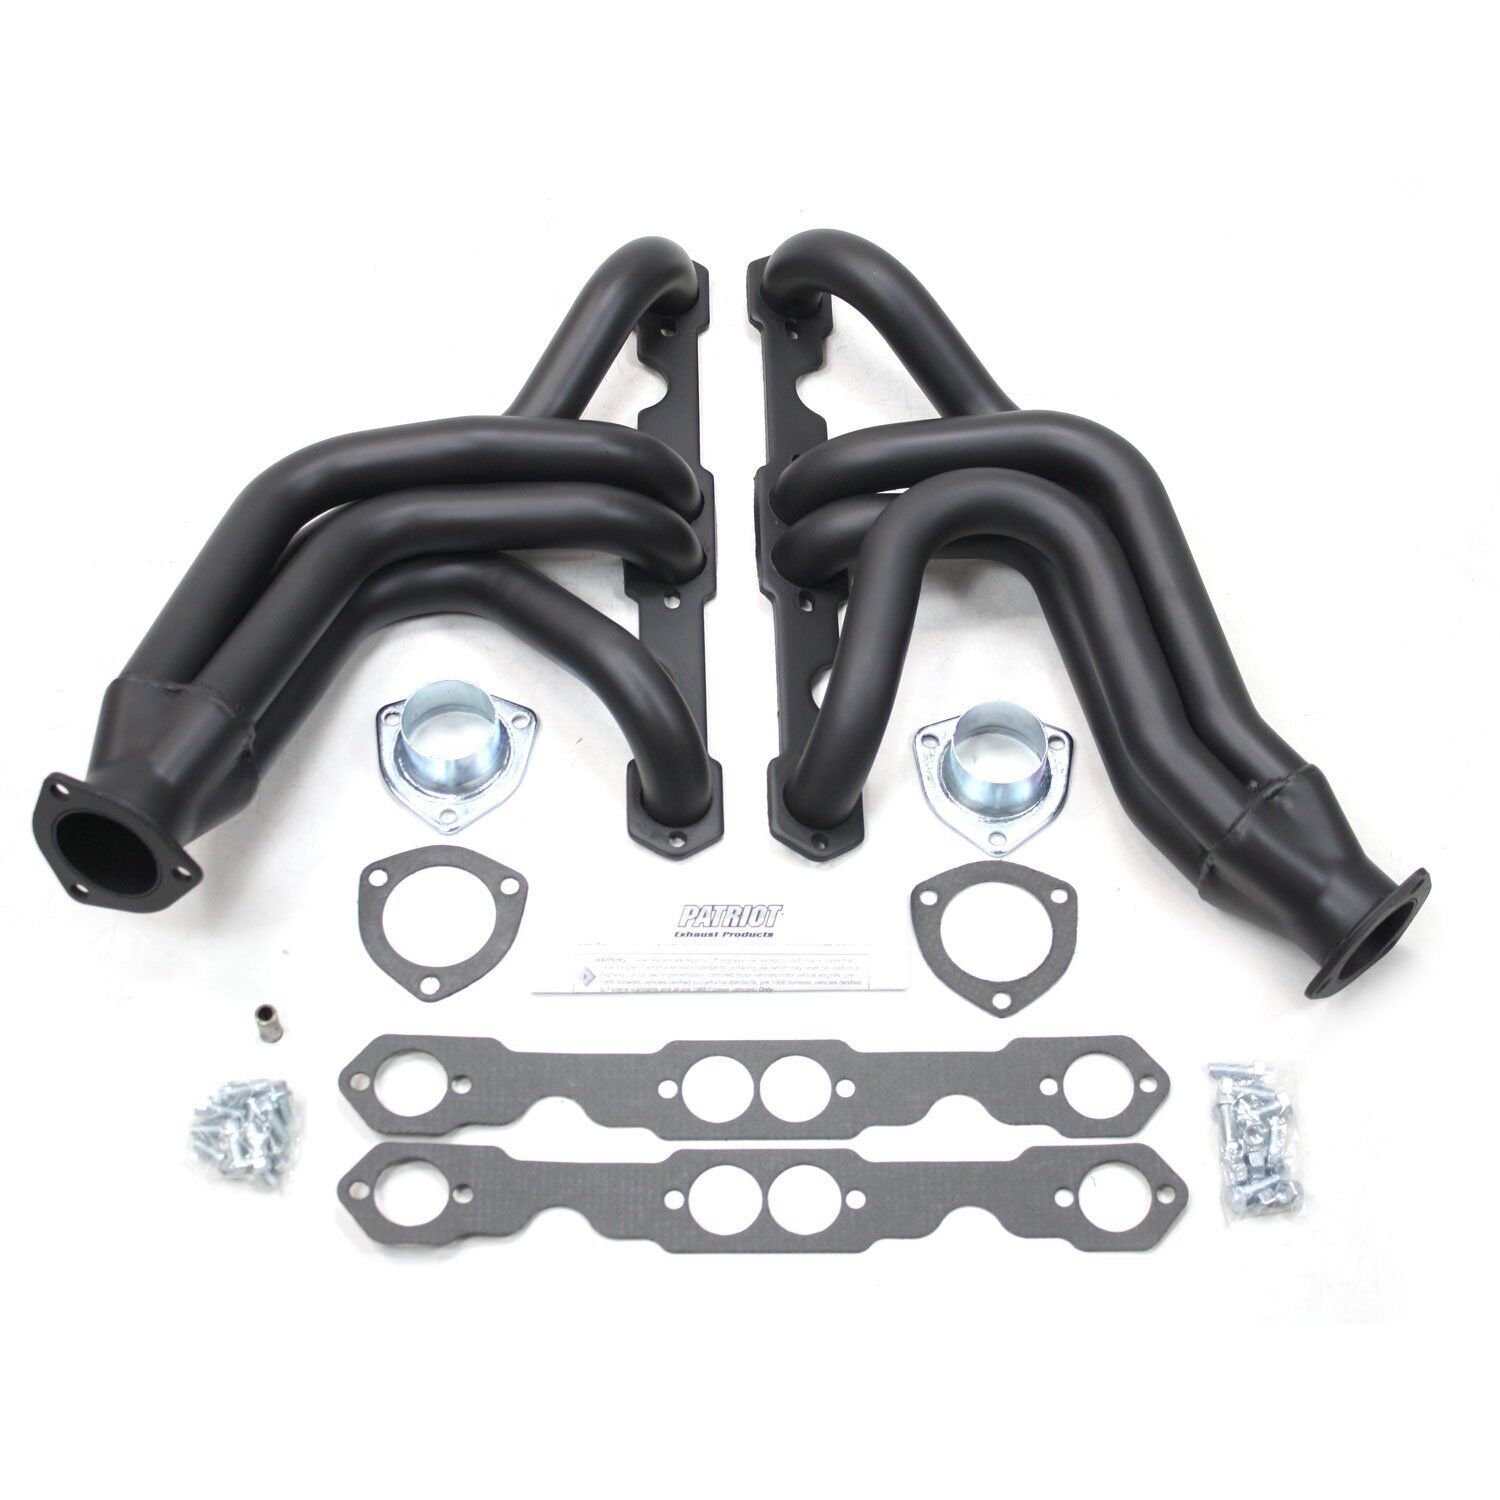 Patriot Exhaust H8025-B GM Specific Fit Headers